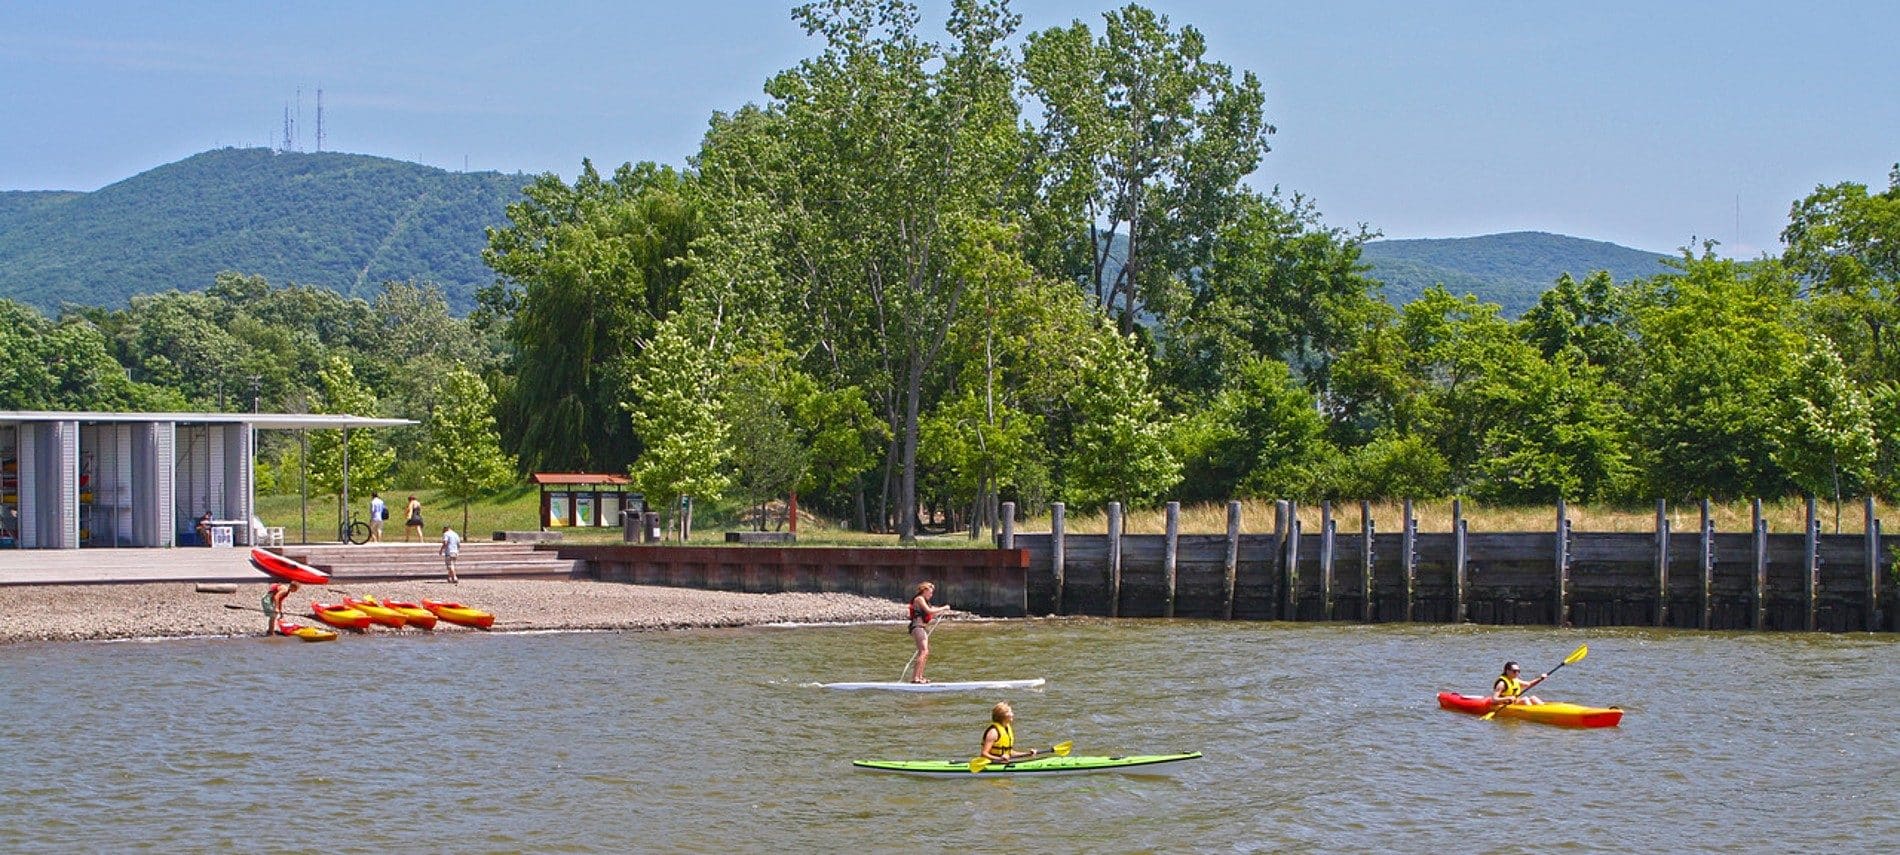 Small cove of water with a beach, white building, wood wall and kayakers in the water